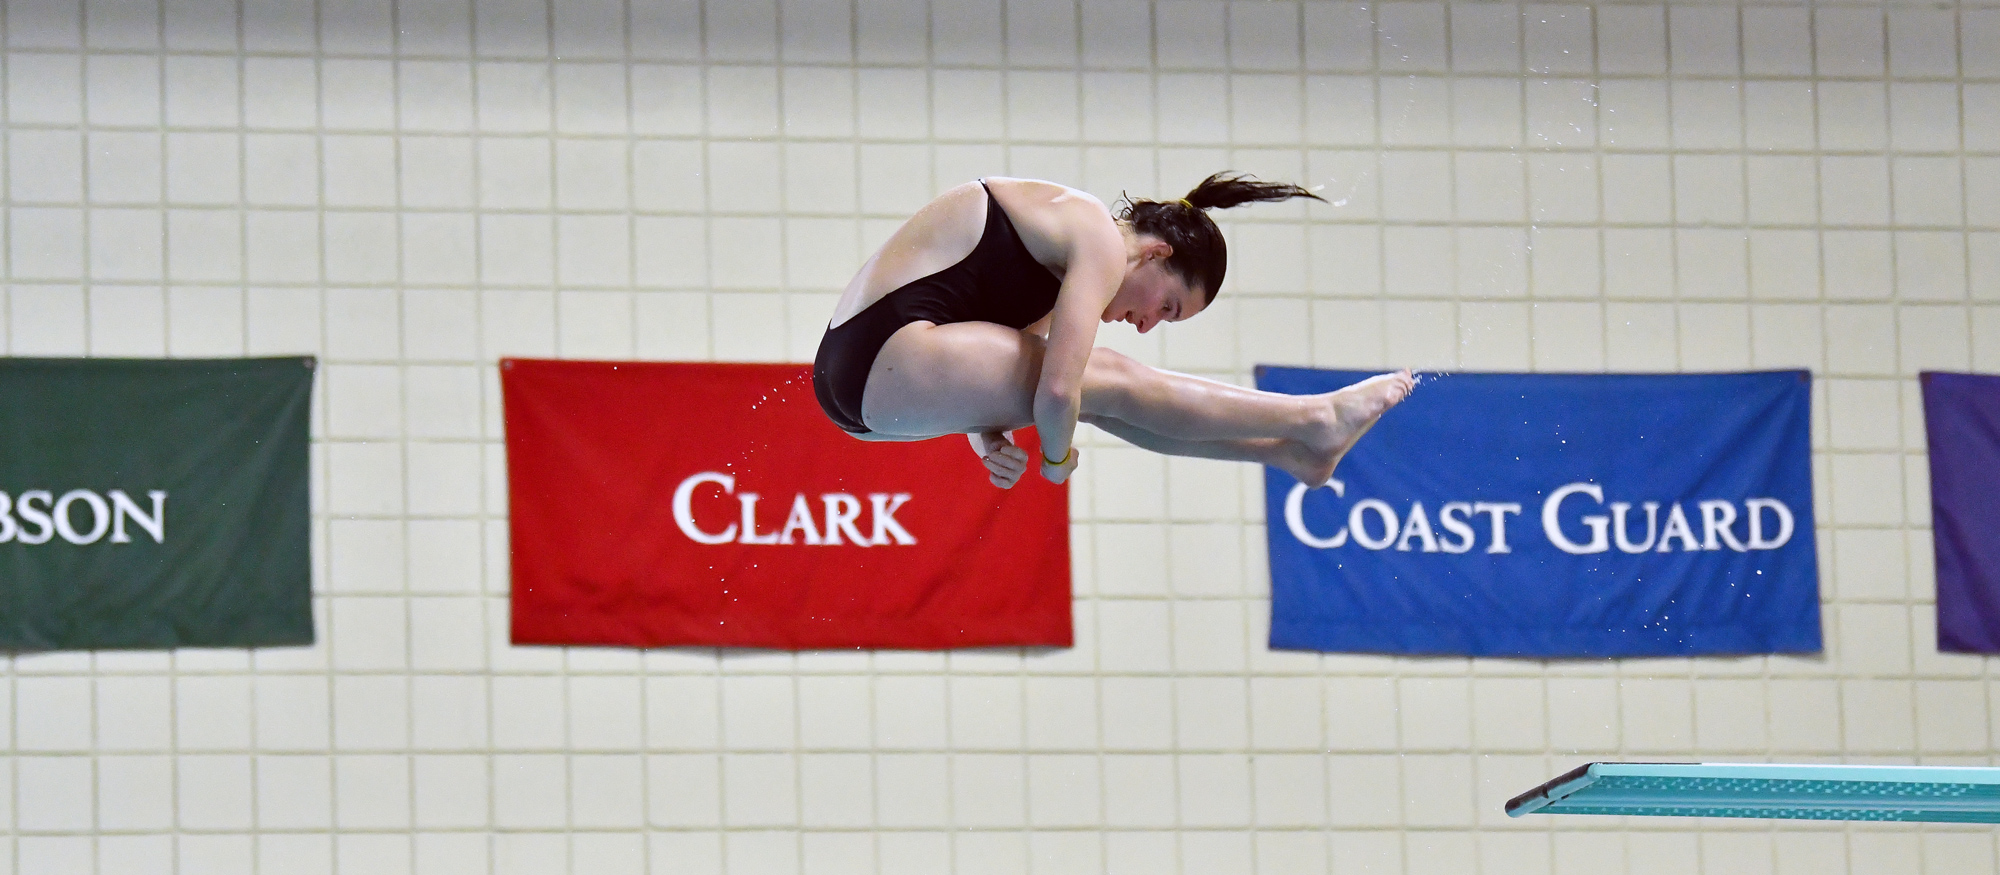 Sophie Simon notched an NCAA Regionals qualifying score in 3-meter diving as Mount Holyoke hosted the University of New England on Nov. 5, 2022. (RJB Sports file photo)